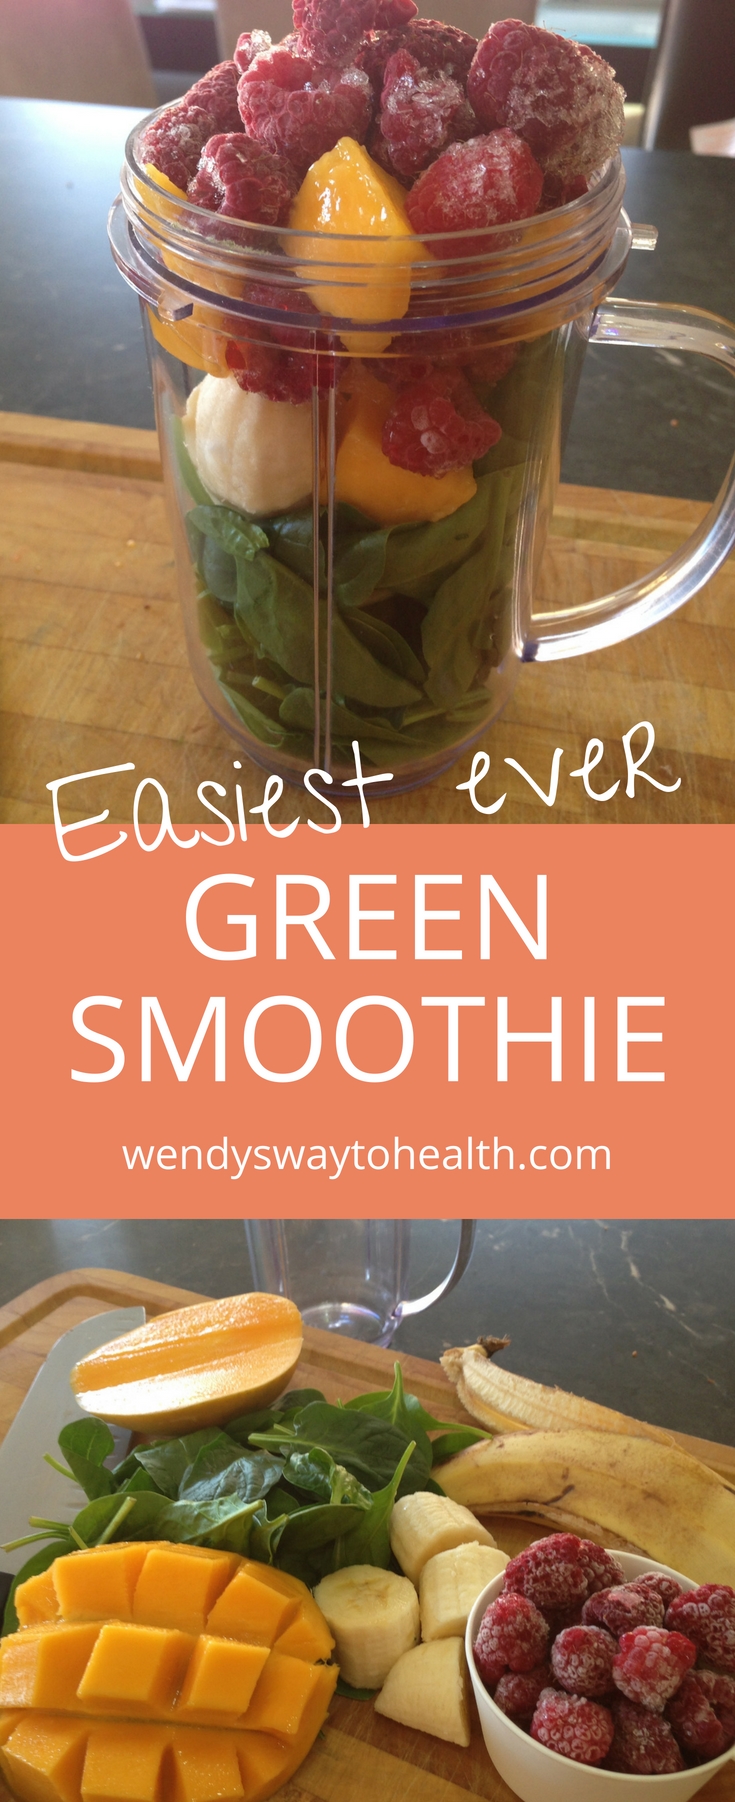 Try this quick and easy green smoothie for a healthy breakfast or snack anytime